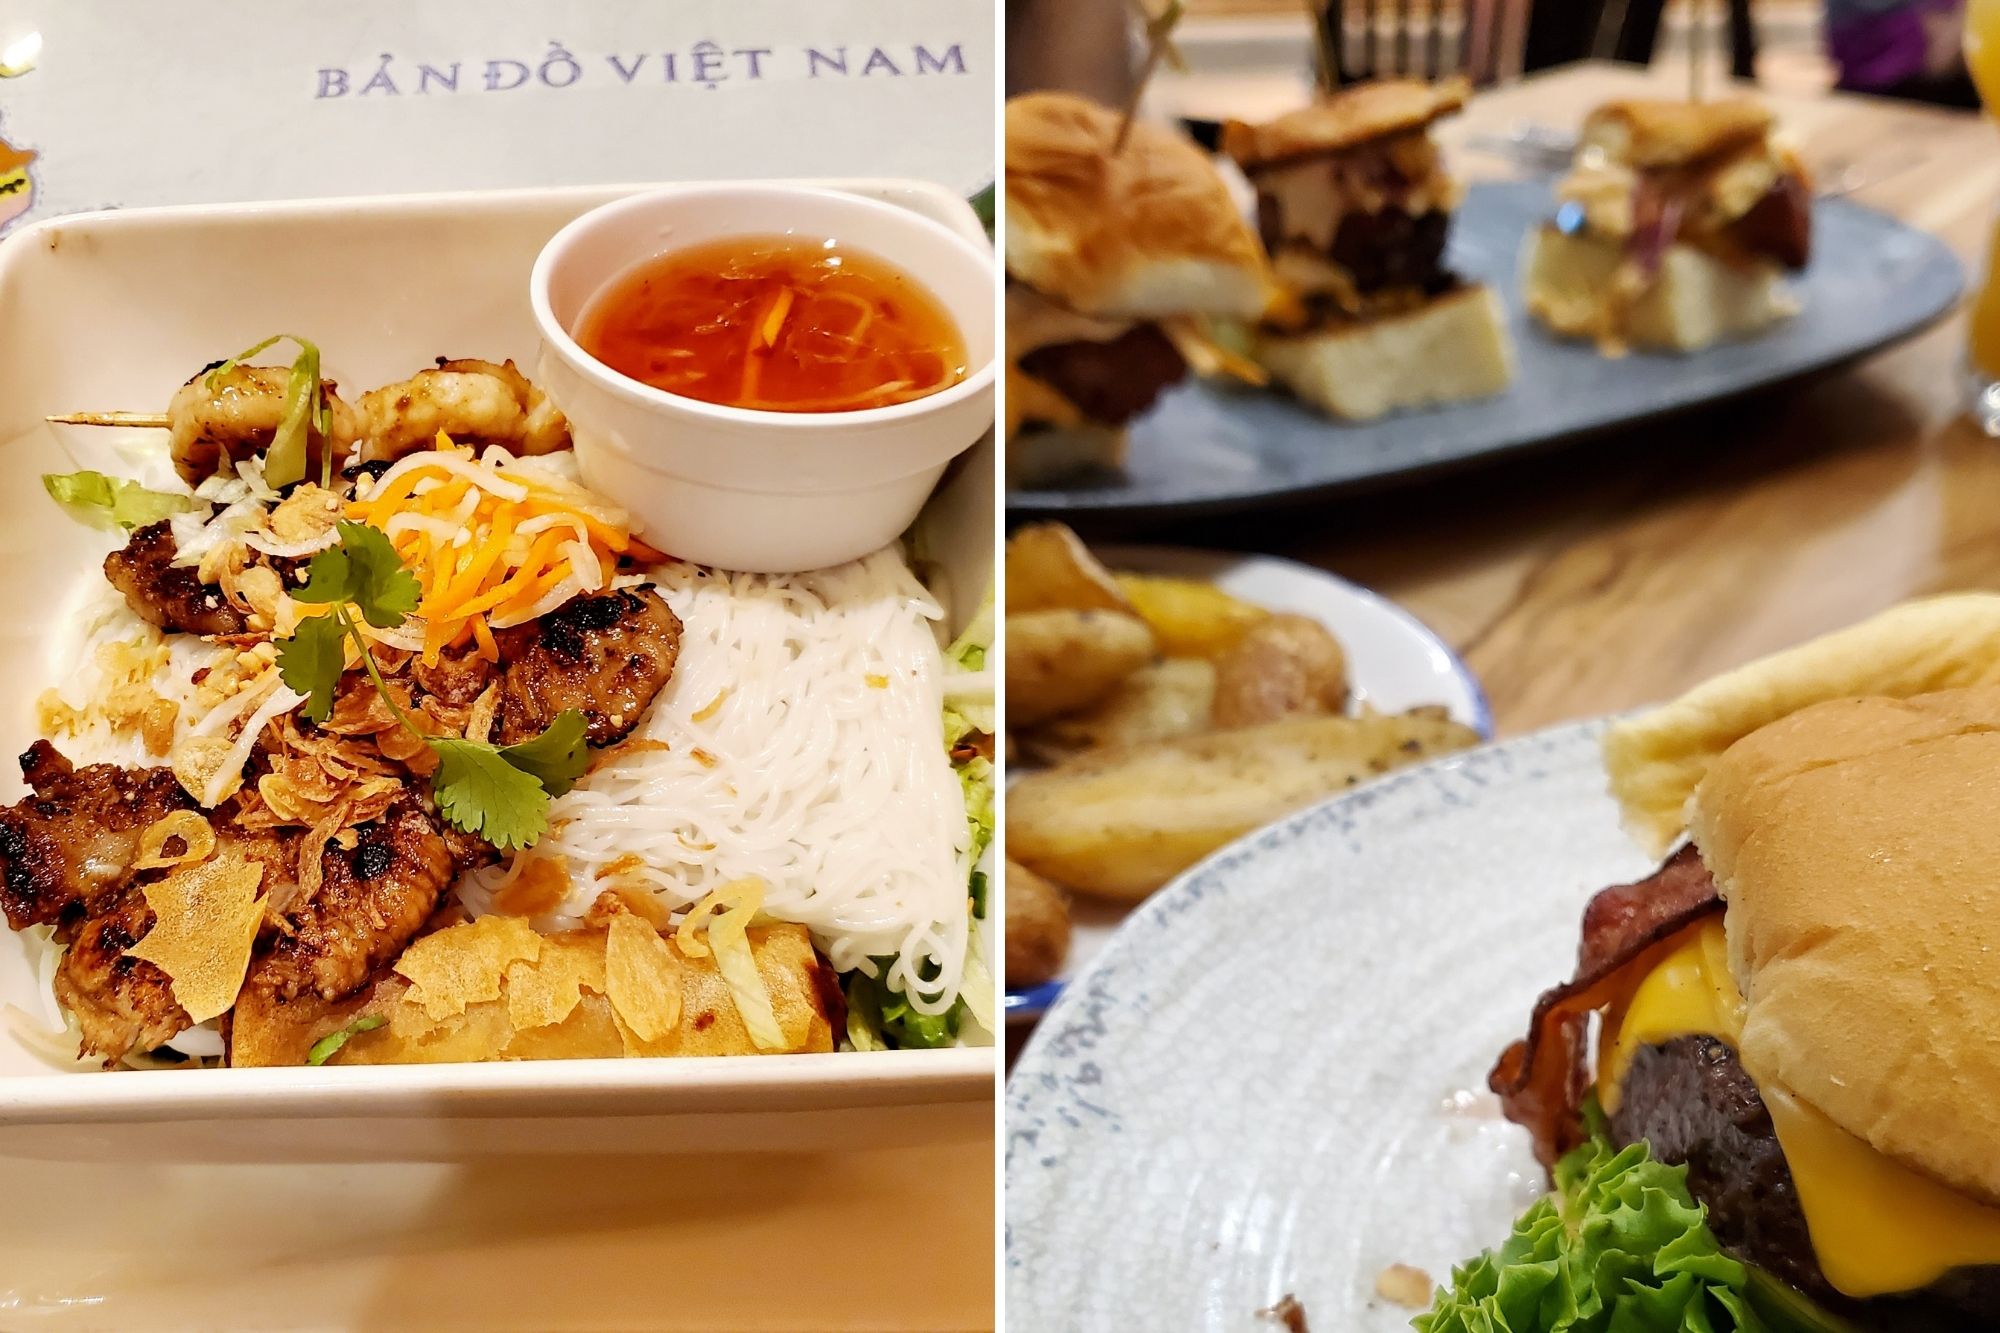 two photo collage: a rice noodle dish with meat and sauce on the left; and a hamburger, potato tray, and sliders on the right